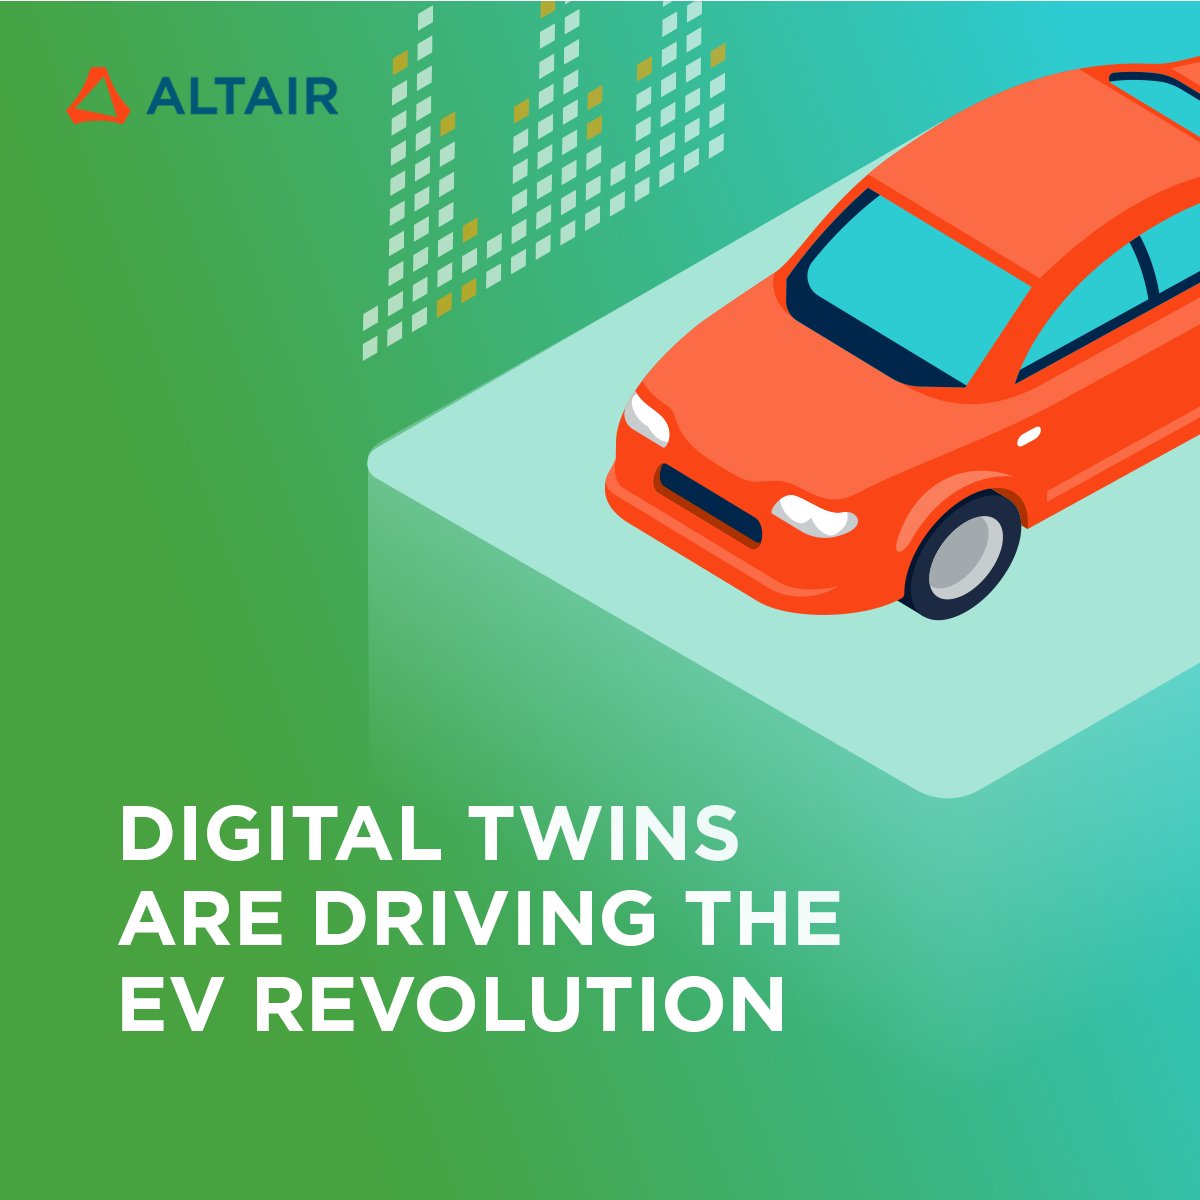 As the world becomes more conscious of #Sustainability initiatives, the development and adoption of #EVs are at the top of many 'must-have' lists. Learn more about how #DigitalTwin is impacting today's automotive industry: bit.ly/43You0w #OnlyForward